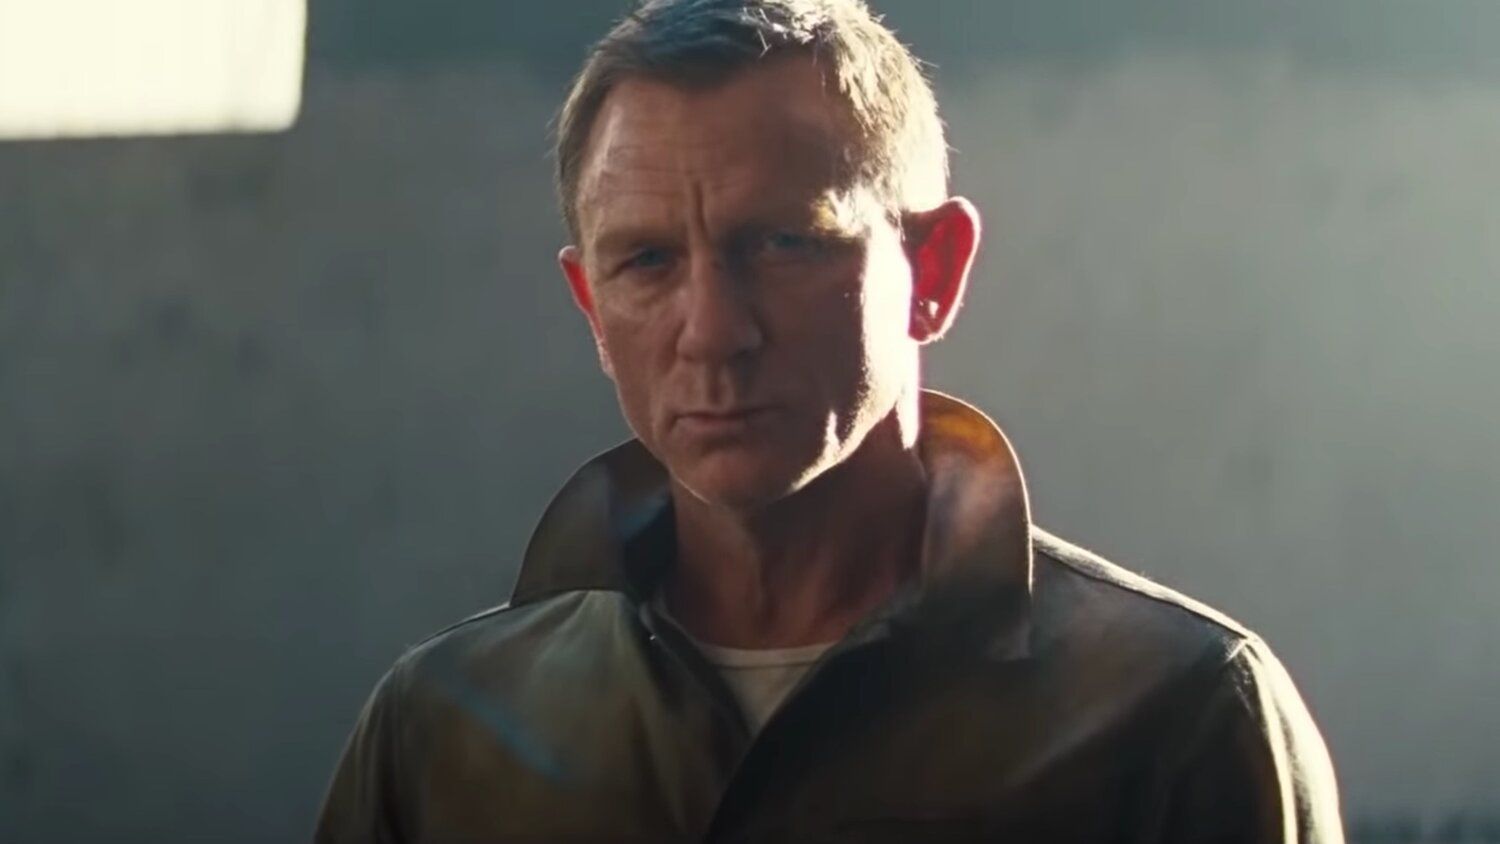 New TV Spot For NO TIME TO DIE on Bond, Where The Hell Are